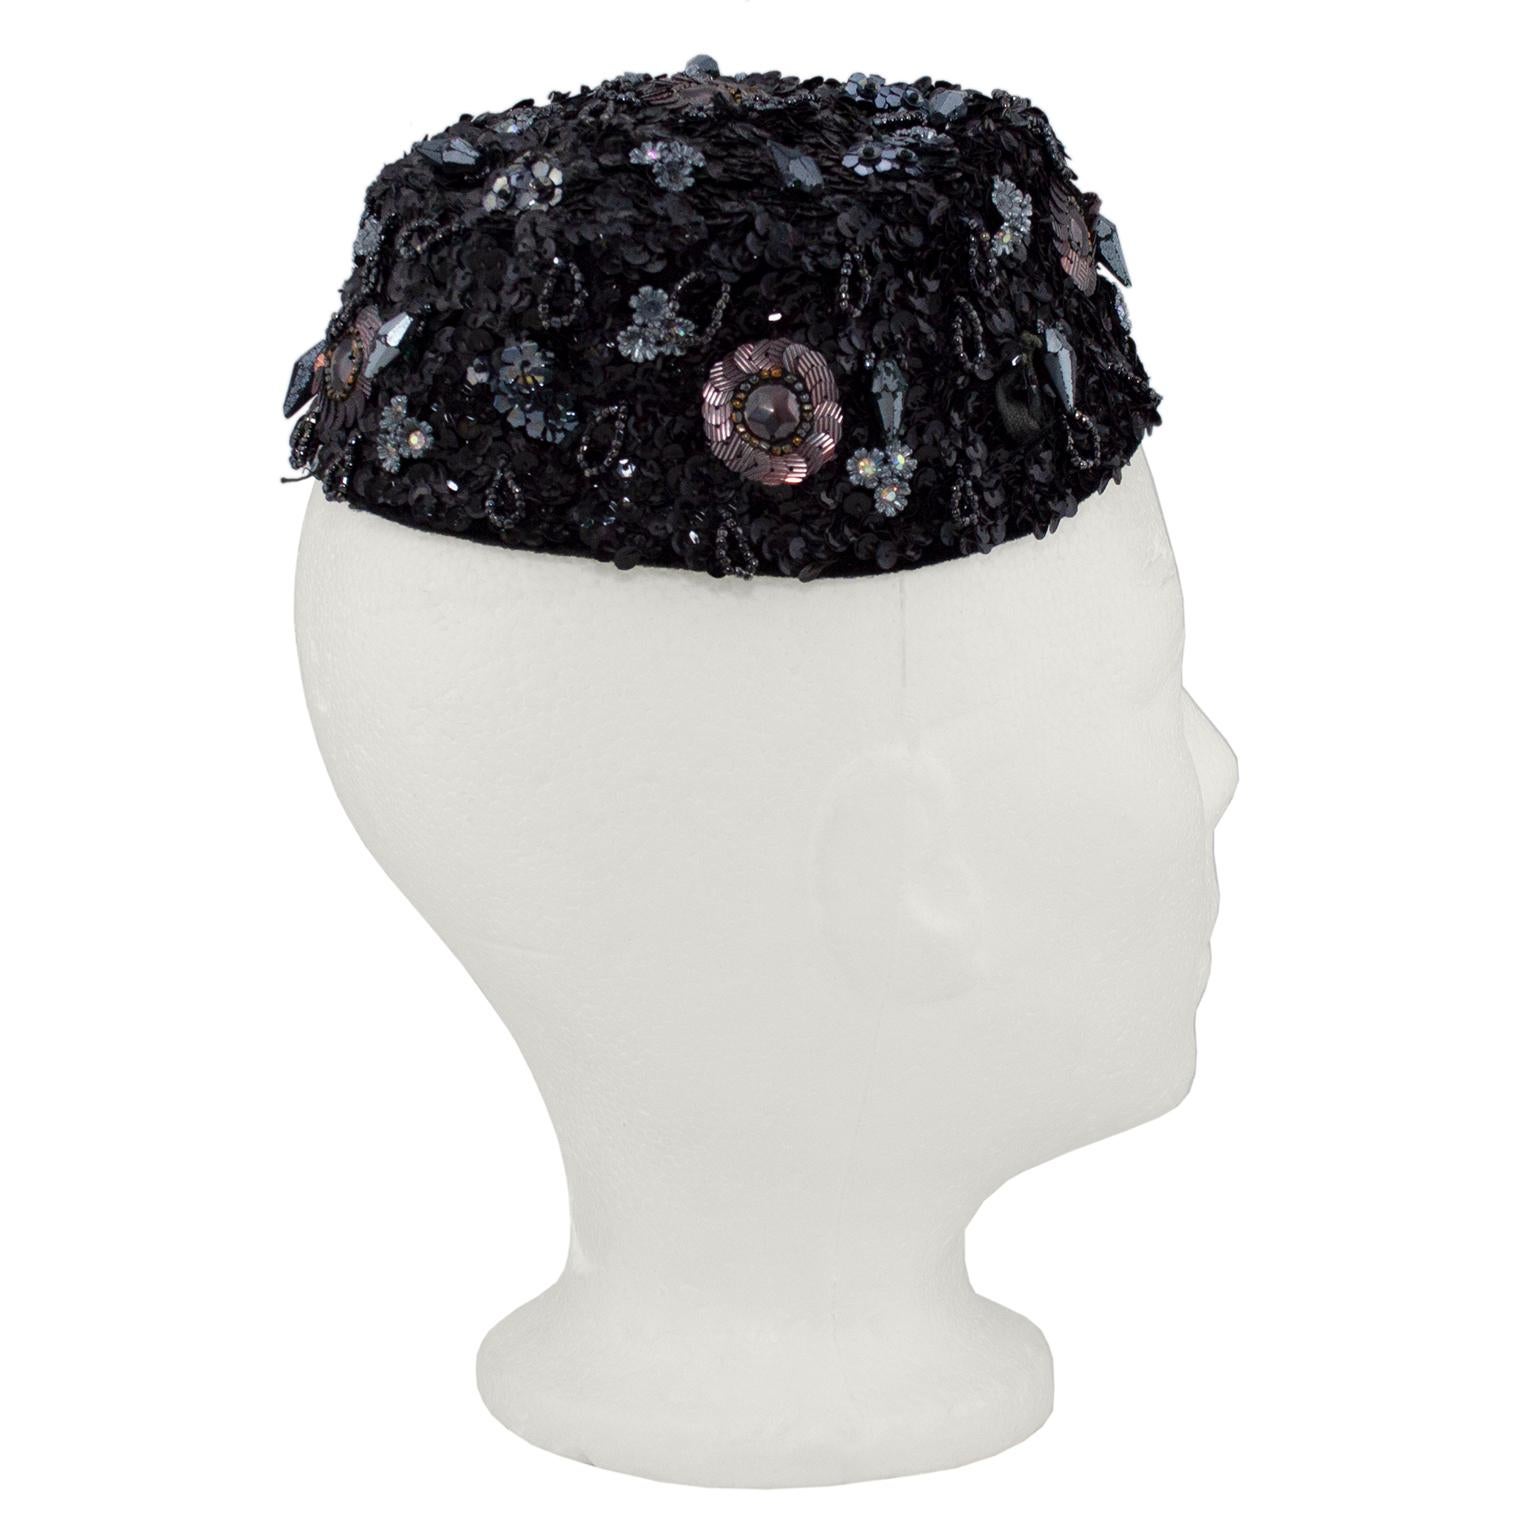 Schiaparelli black sequin and beaded evening hat/fascinator. Elegant accessory to wear or display with the unmistakable red script label. Two side combs to secure the hat at a rakish angle, multiple florets of sequin, bronze rosettes and dangling